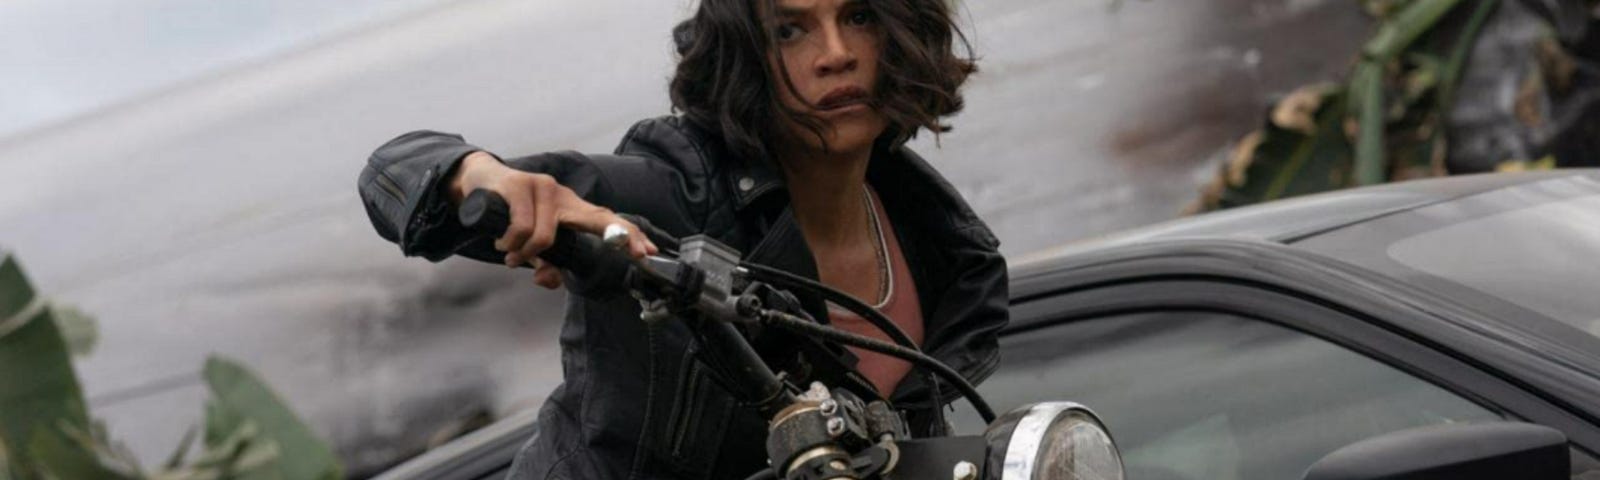 A woman with short hair rides a motorcycle